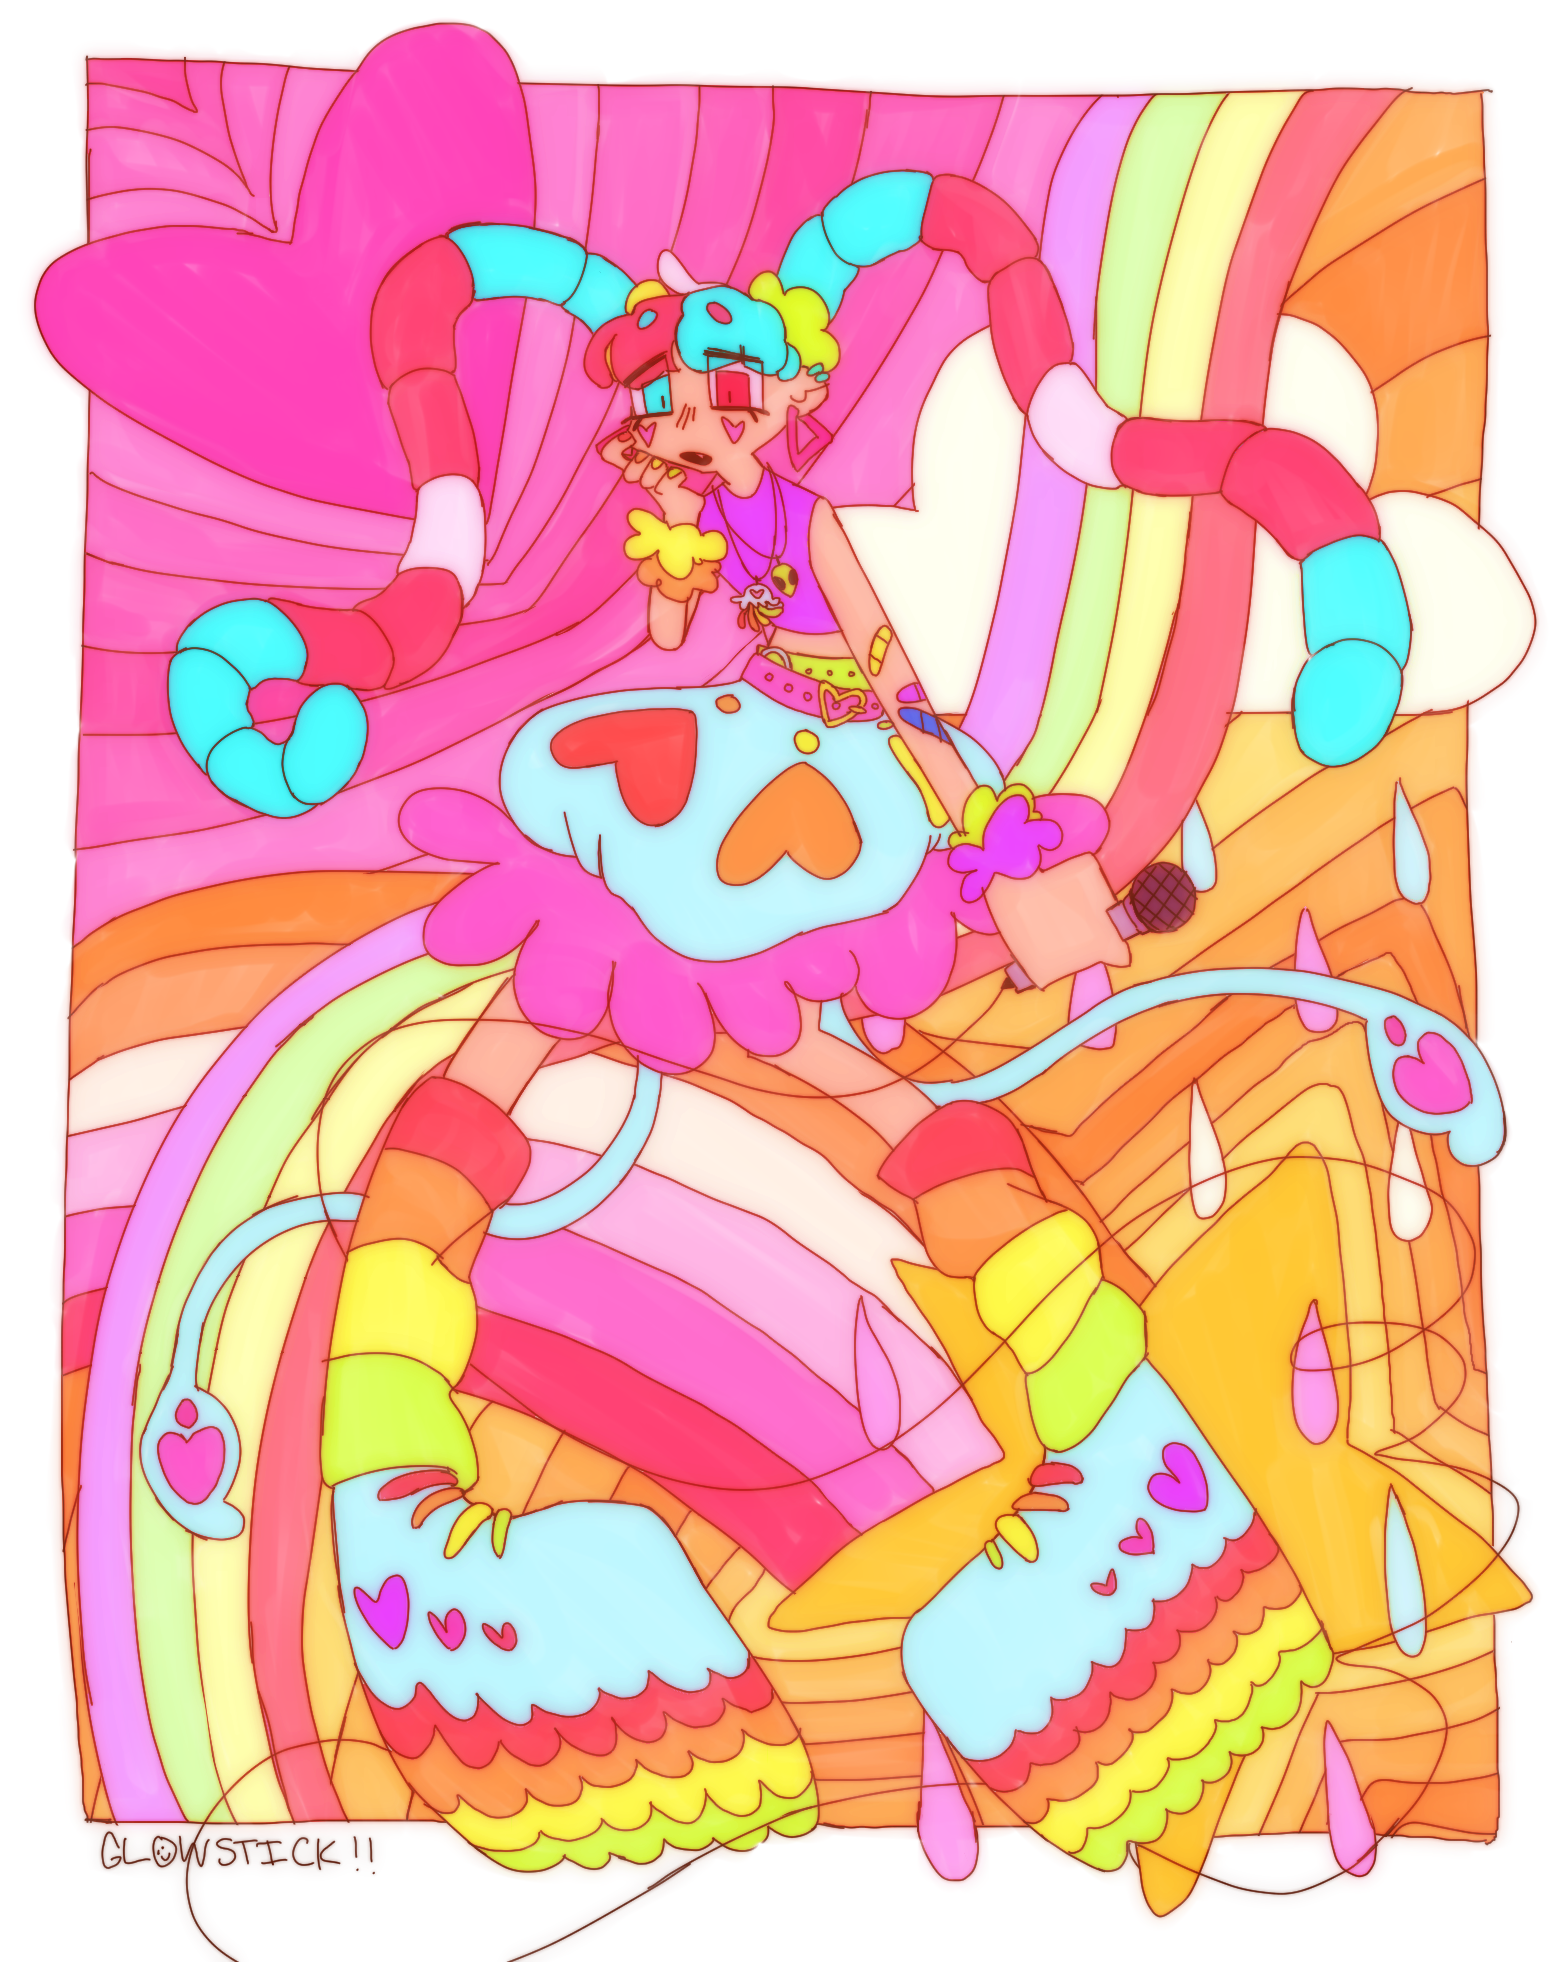 A drawing of the webmaster's mikusona. They have pale skin and pigtails that look like gummy worms. The pigtails are colored so the segments appear to resemble the trans flag. He is wearing a skirt that resembles a jellyfish, a pink crop top, and rainbow legwarmers and platform shoes. The background is made up of a hand-drawn, psychadelic pink and orange pattern.